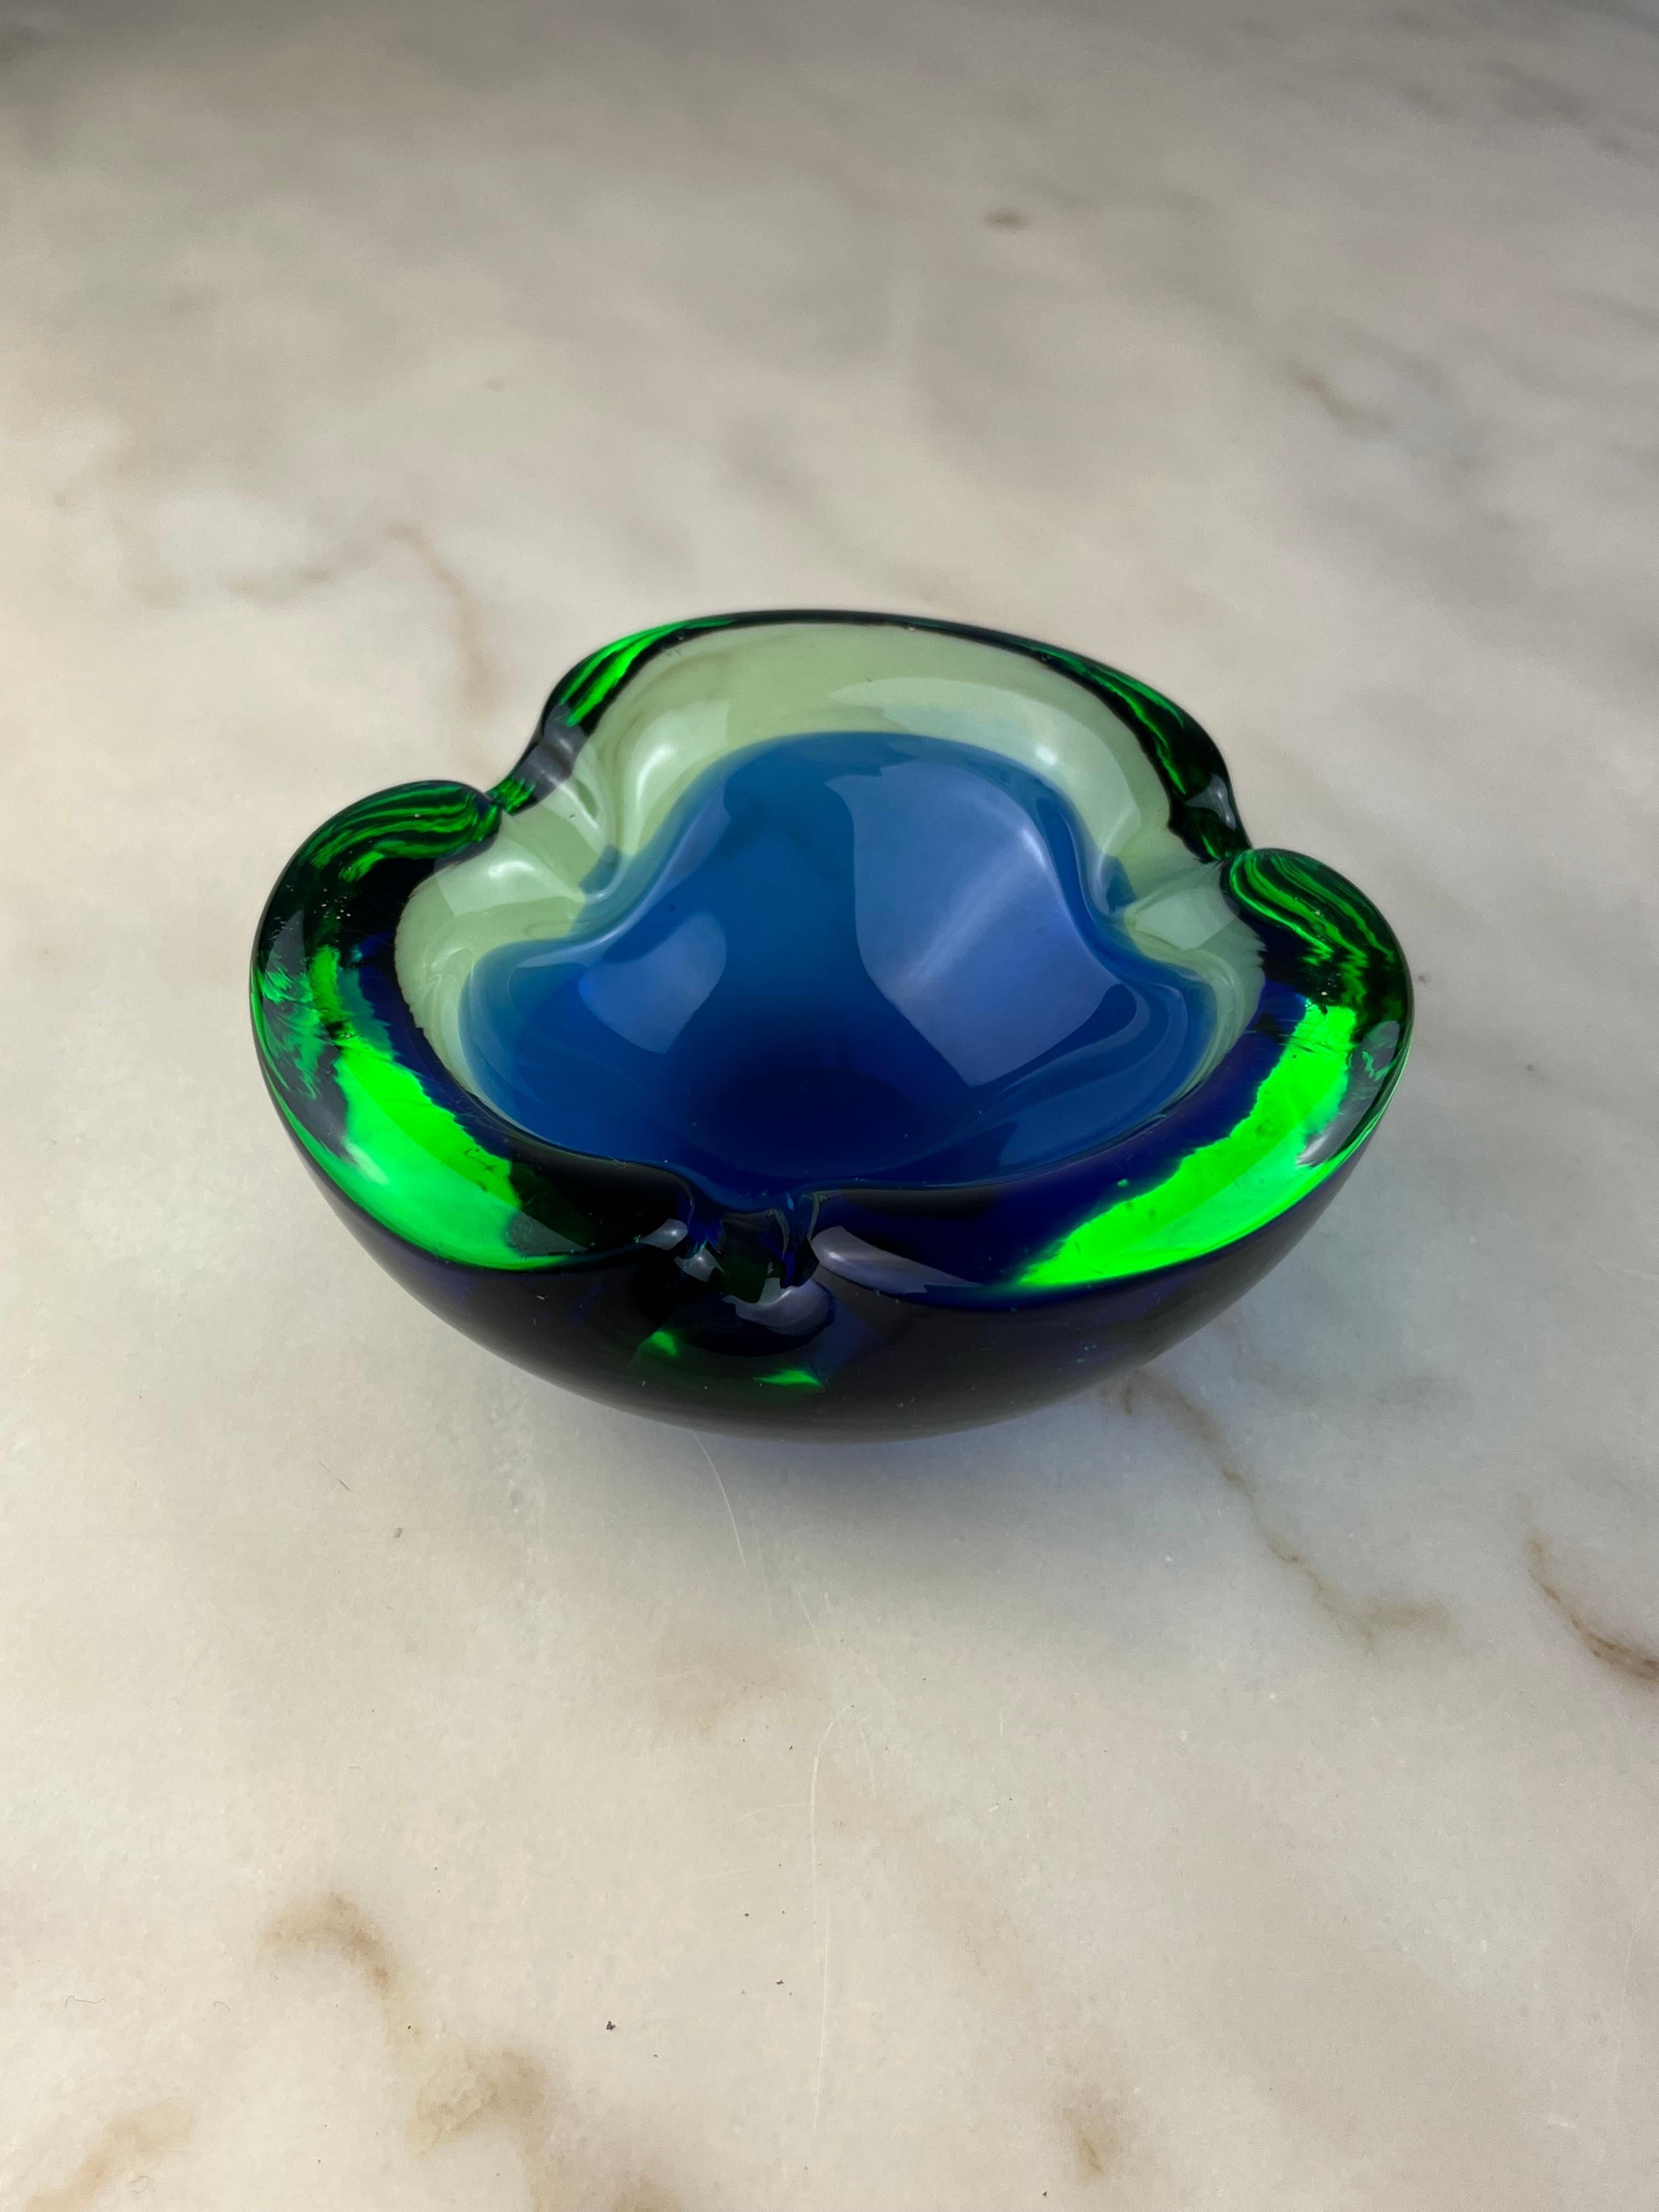 Murano submerged glass ashtray/valet tray, Italy, 1960s.
Small signs of the time, it is intact.
Polychrome, belonged to my great-grandfather.